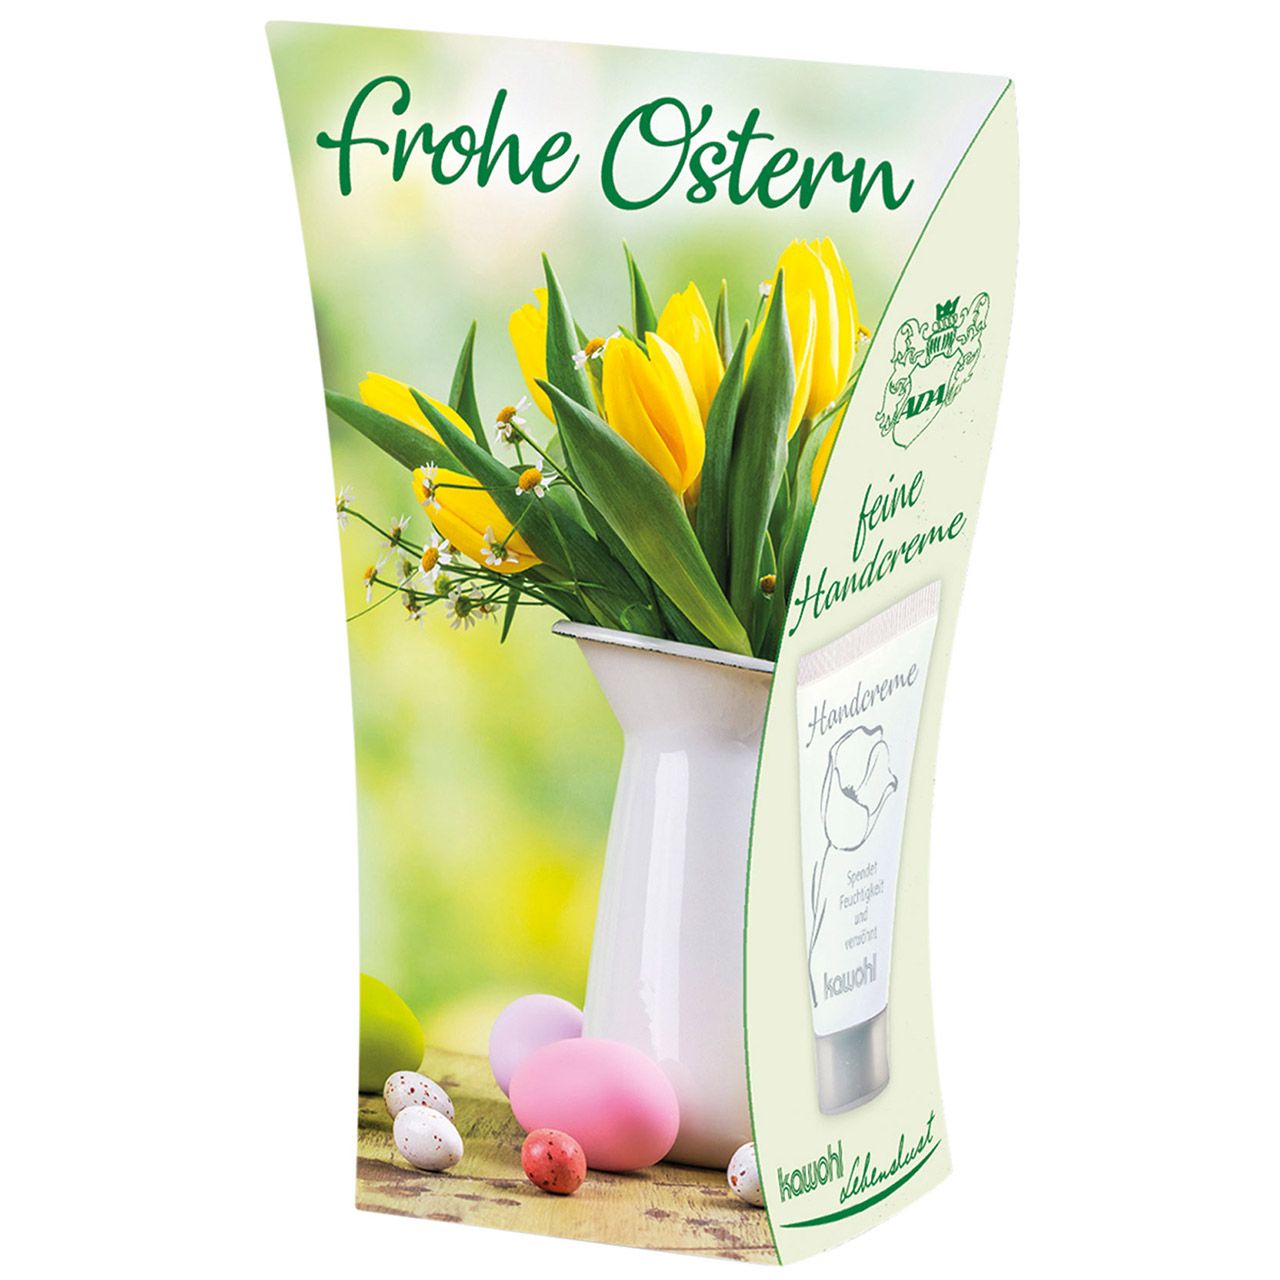 Handcreme Frohe Ostern